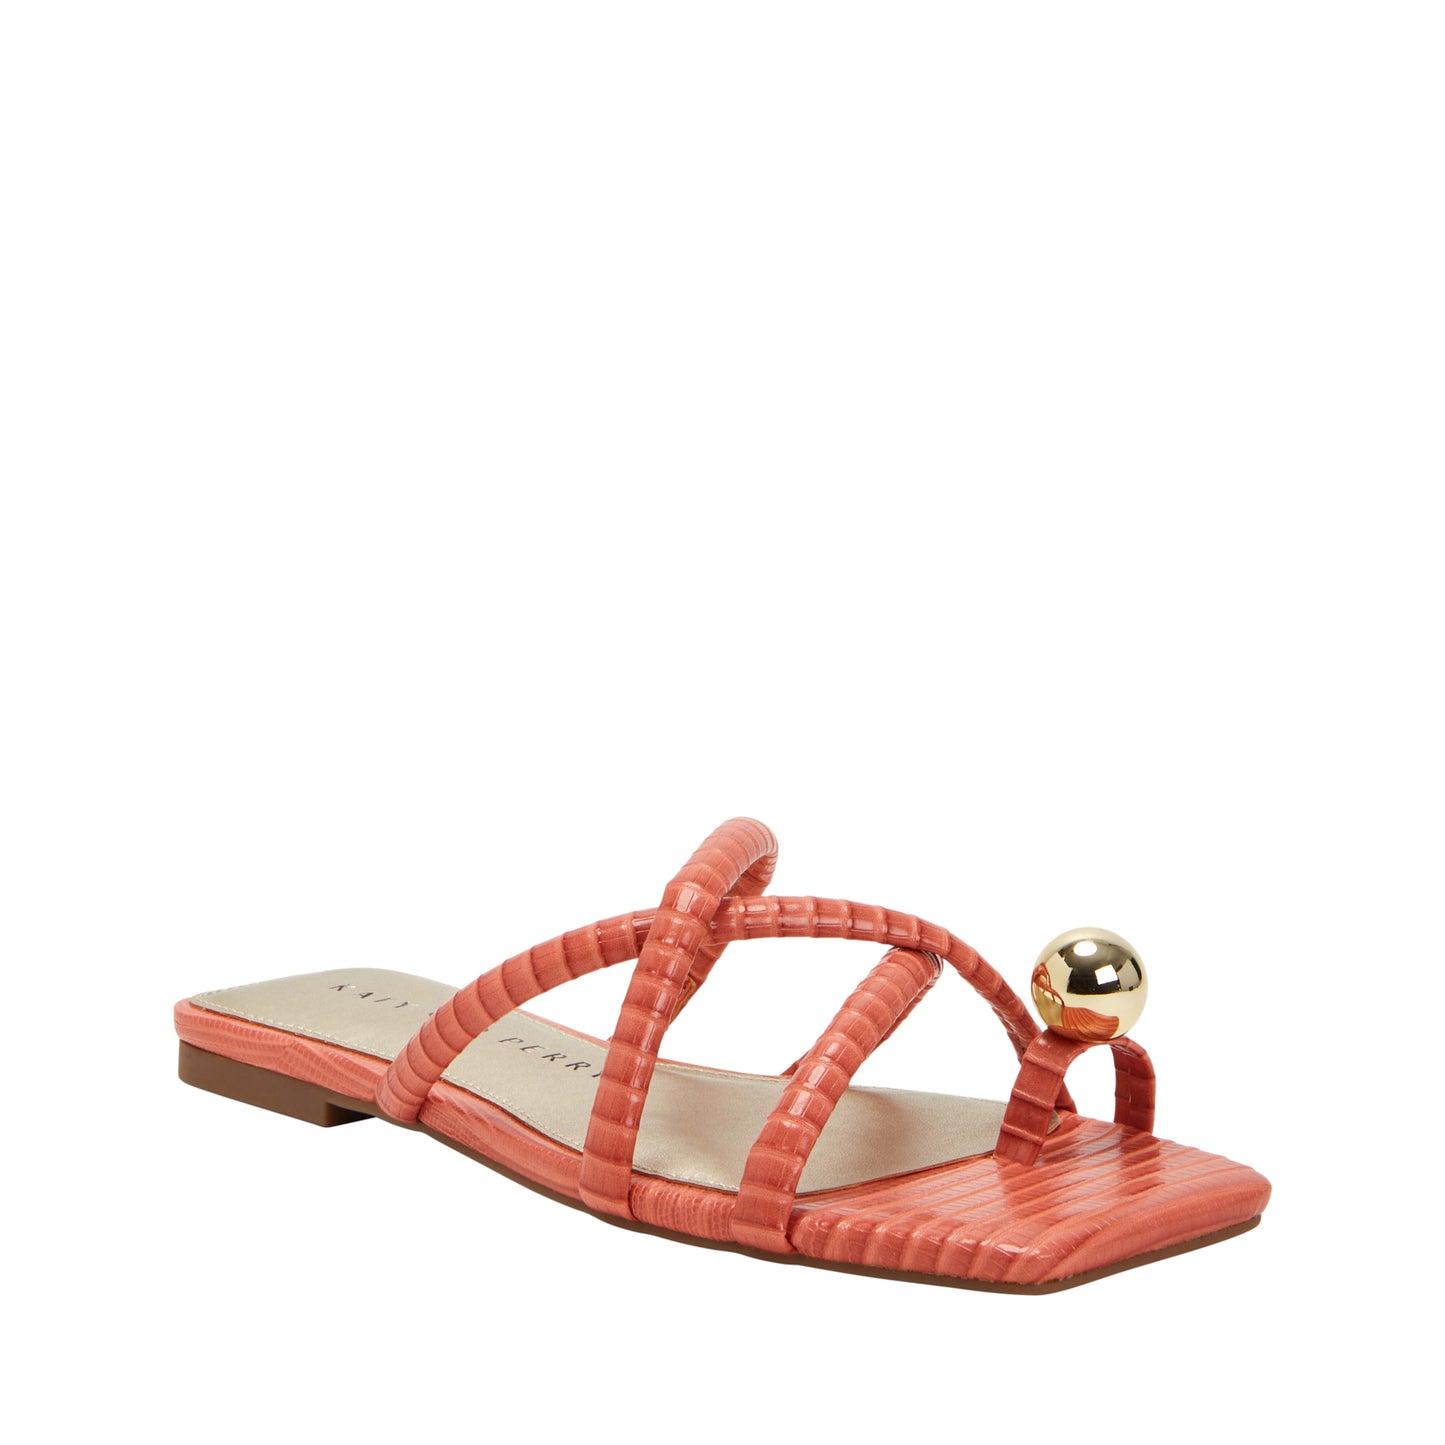 THE CAMIE TOE THONG SANDAL